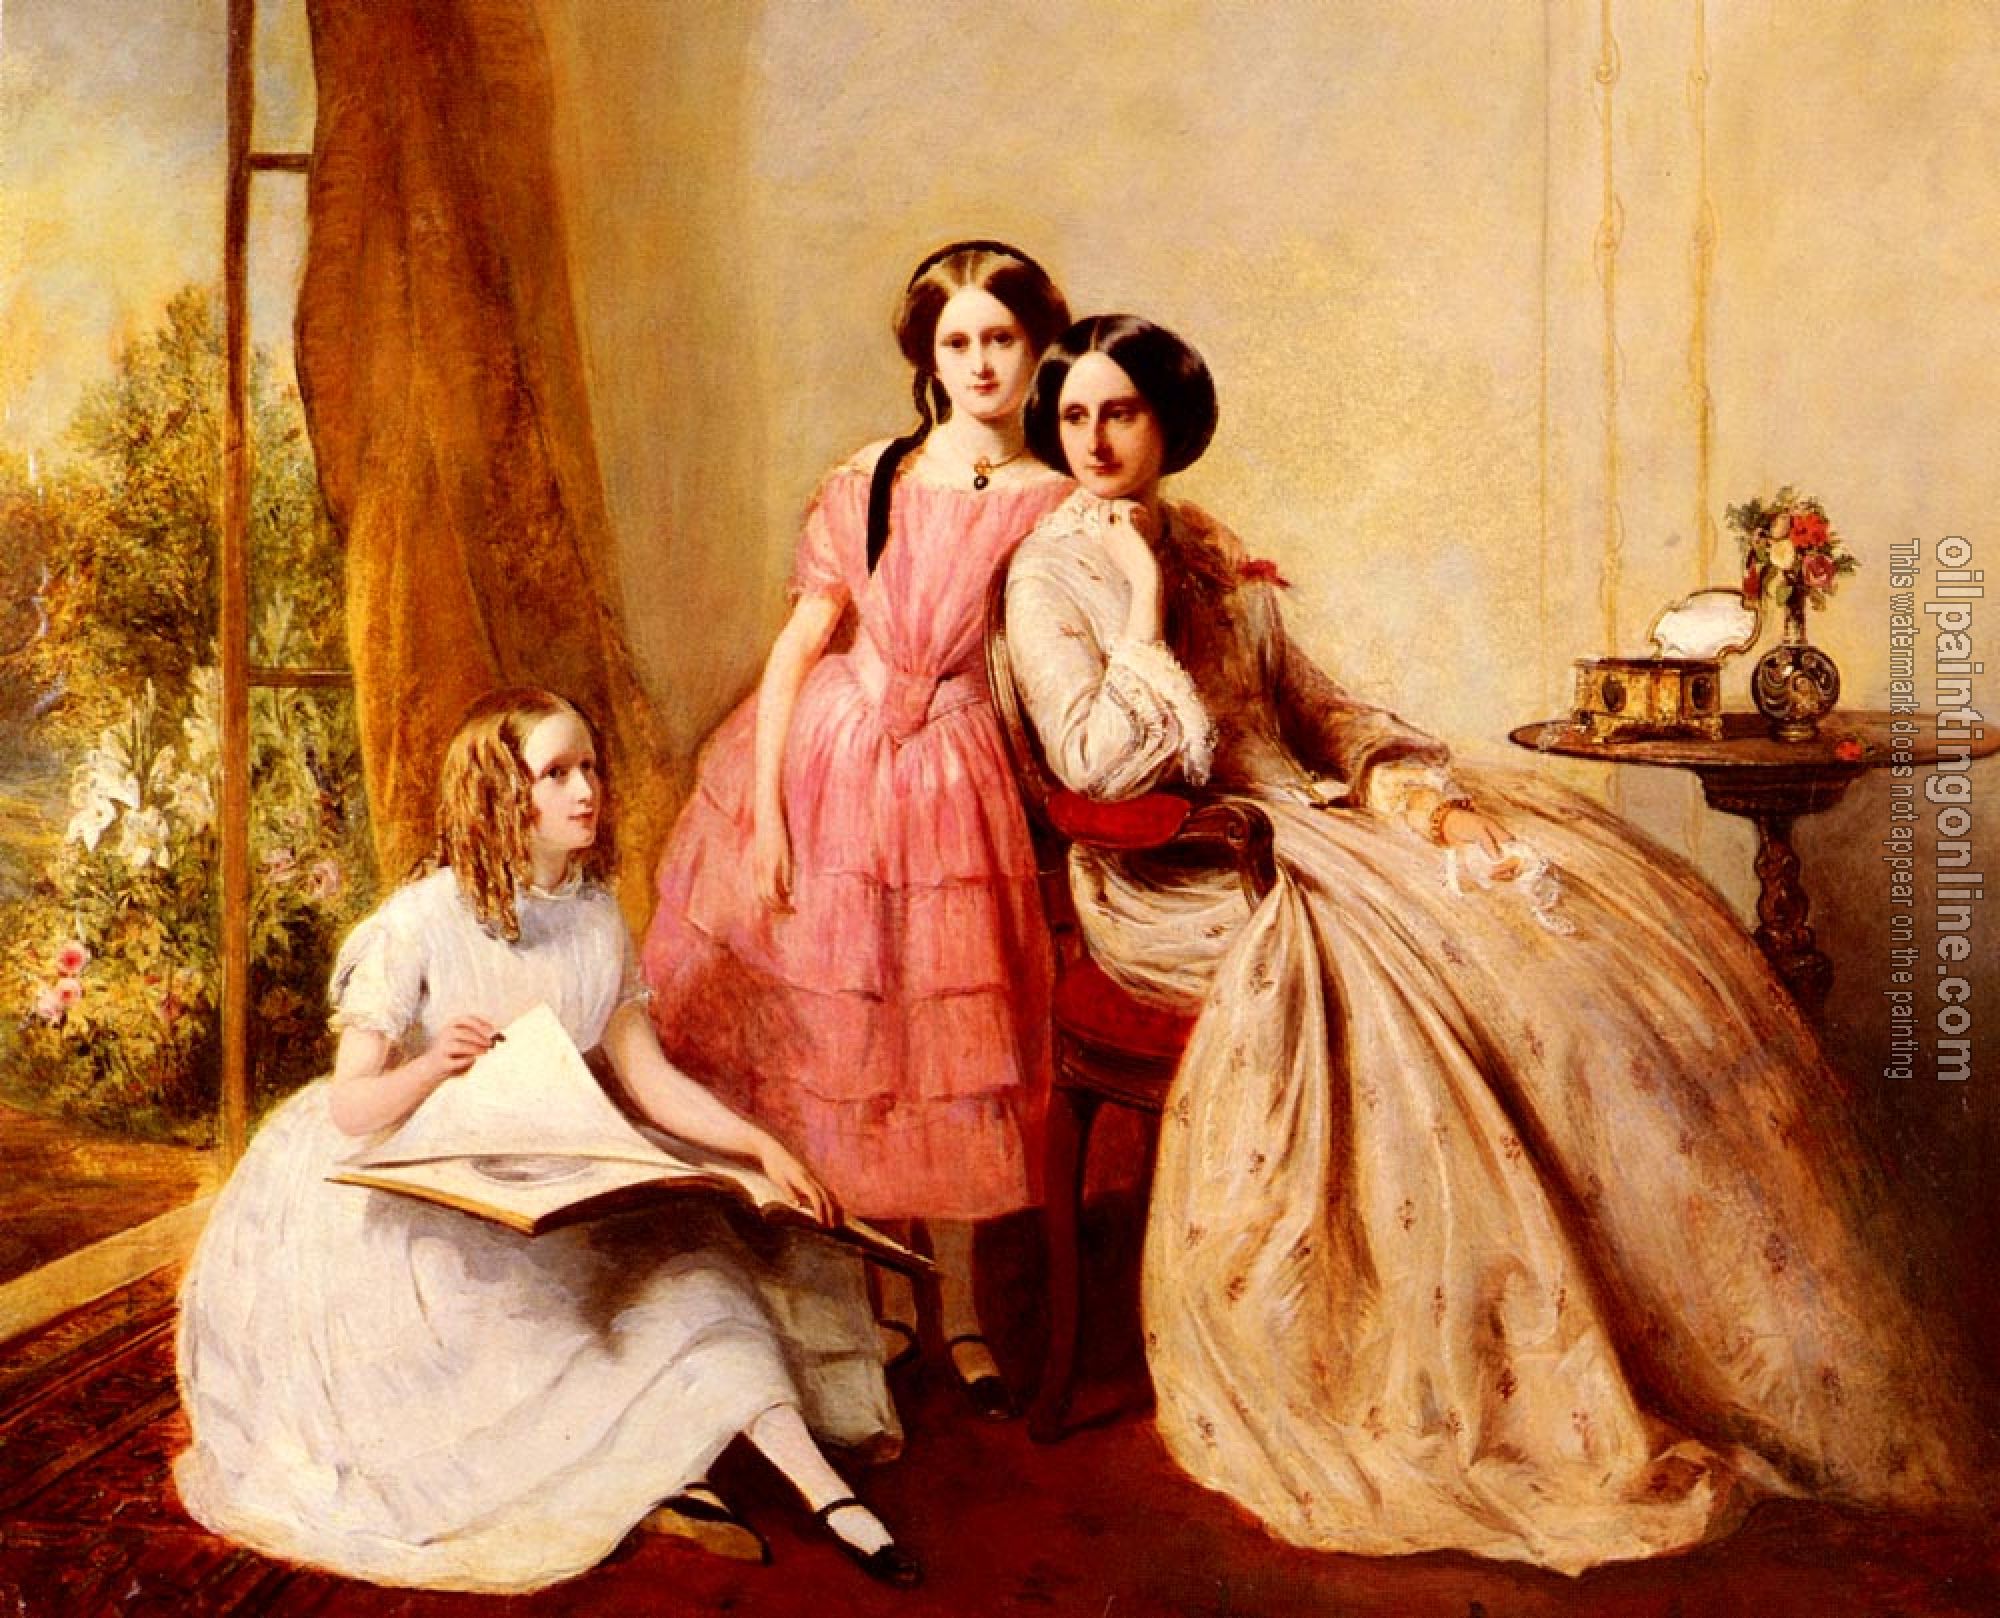 Solomon, Abraham - A Portrait Of Two Girls With Their Governess